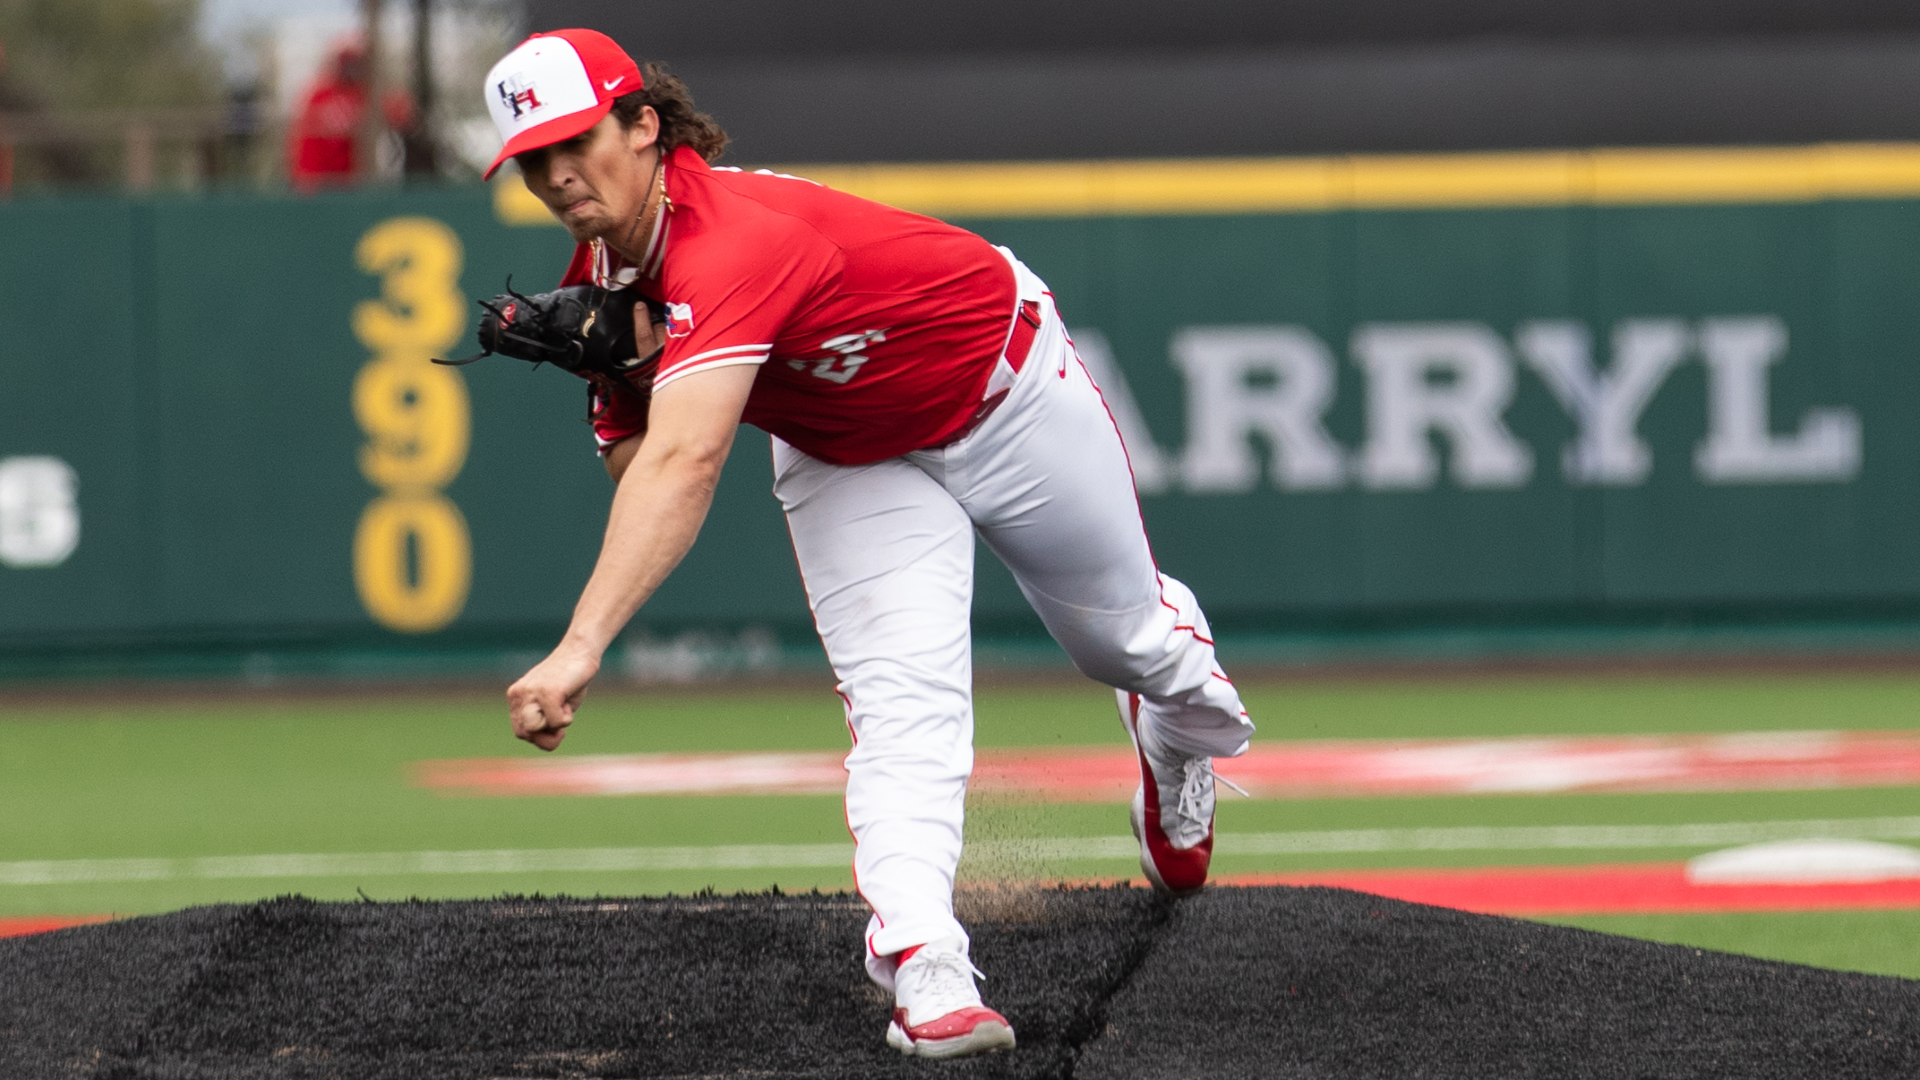 Lael Lockhart was picked as a preseason all-conference pitcher after the pitcher put up a 3.58 ERA and 76 strikeouts for UH in 2019. | Ahmed Gul/The Cougar